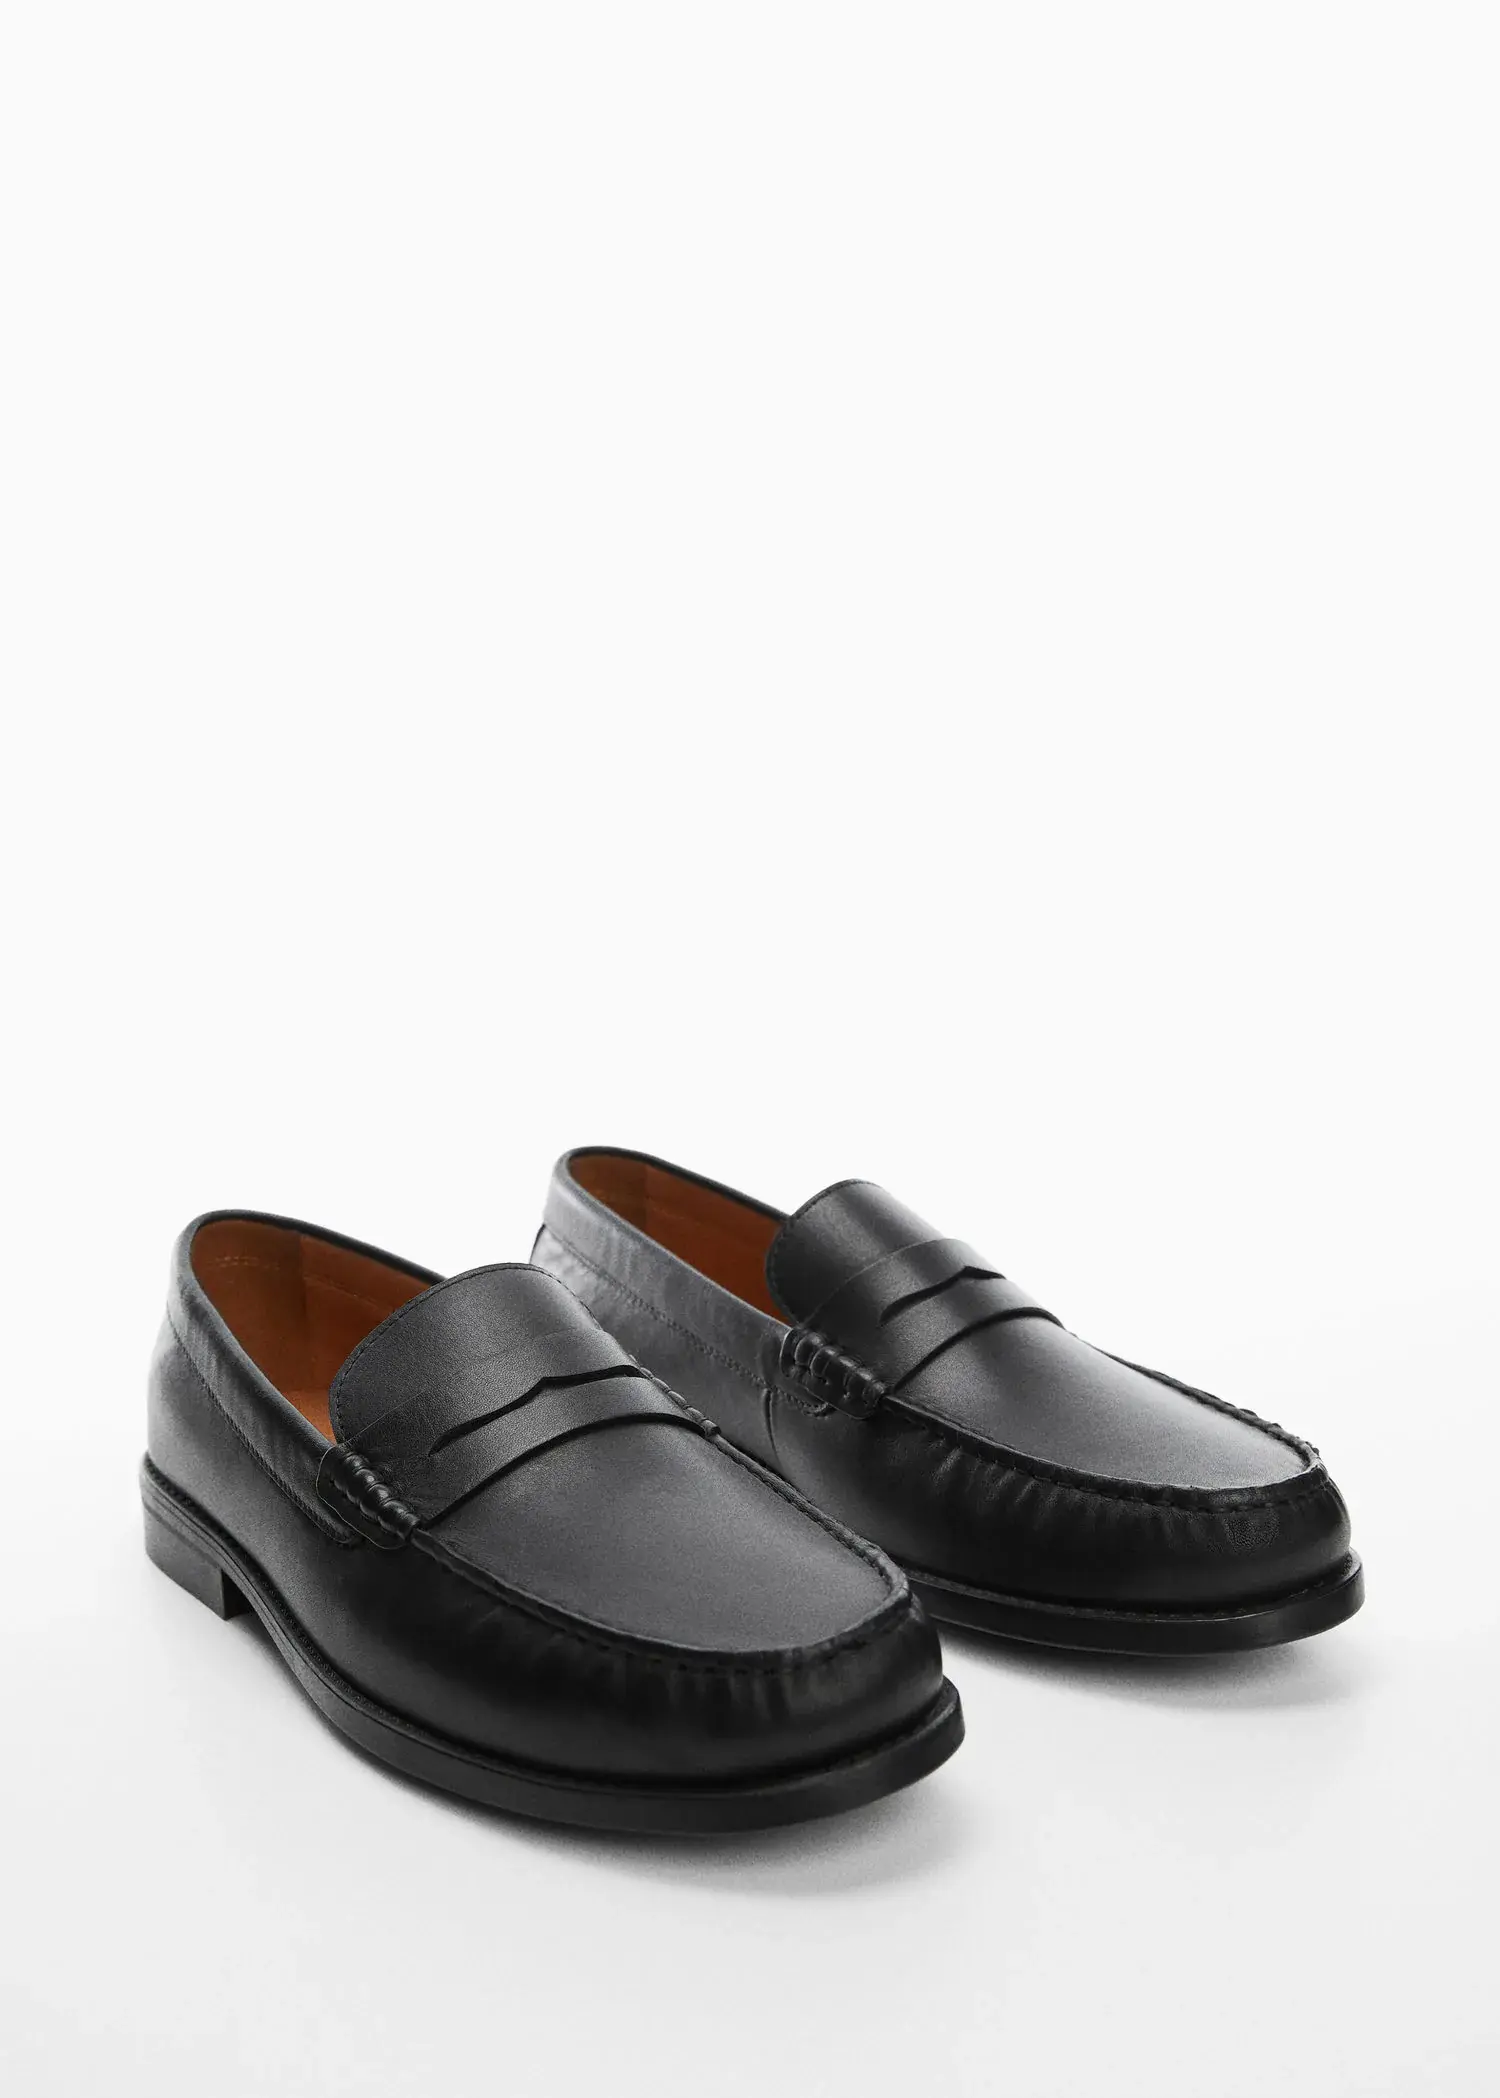 Mango Leather penny loafers. a pair of black loafers on top of a white surface. 